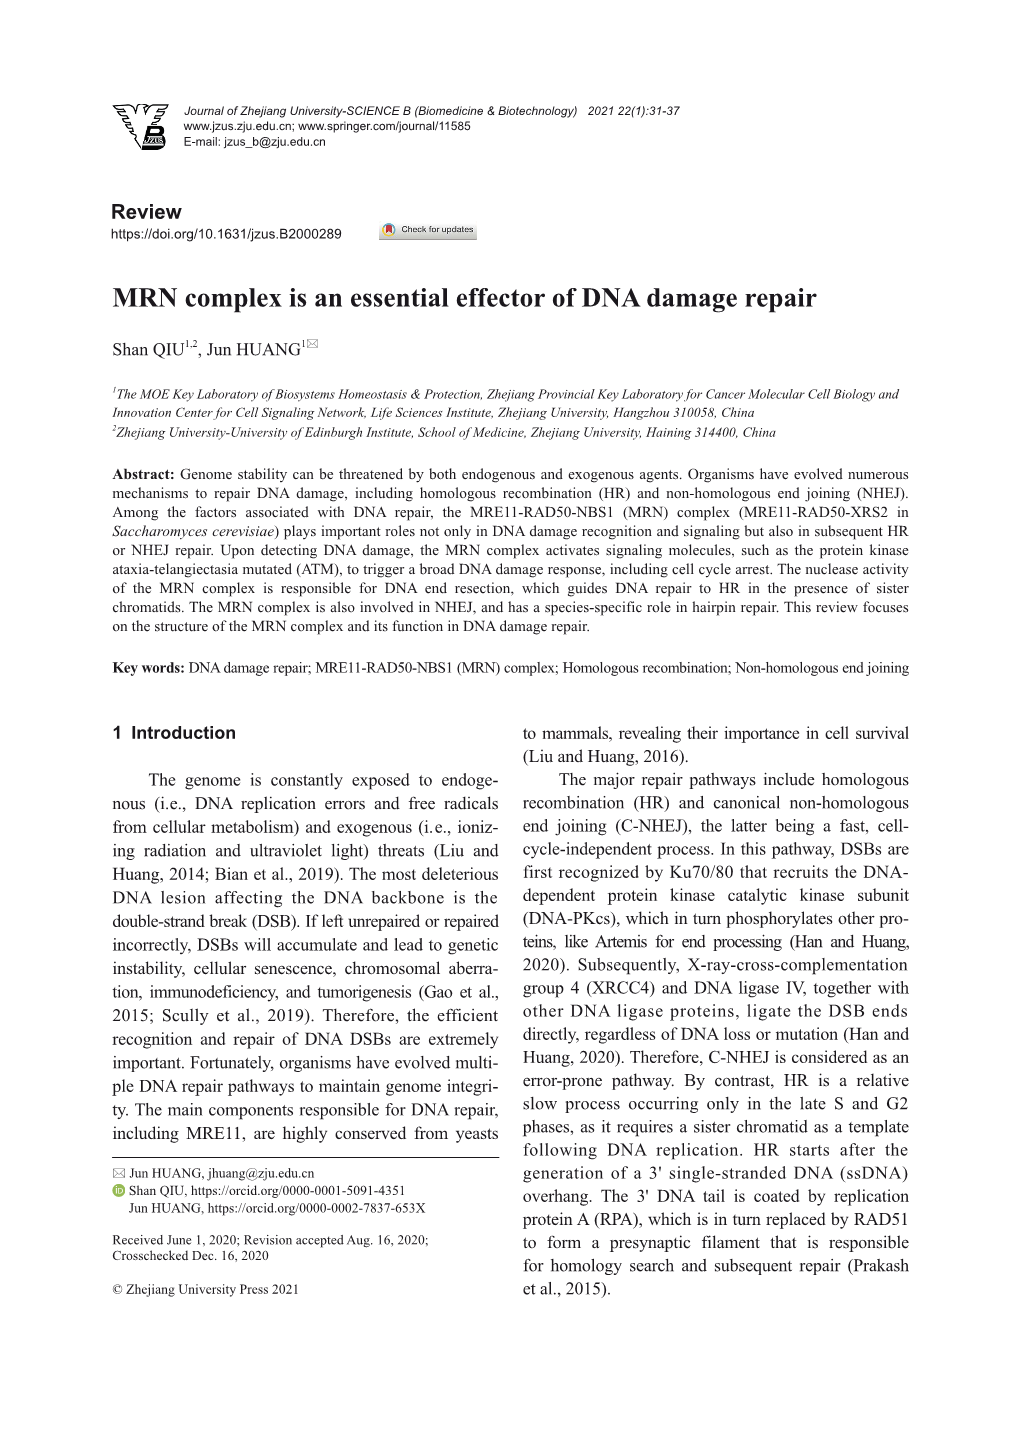 MRN Complex Is an Essential Effector of DNA Damage Repair